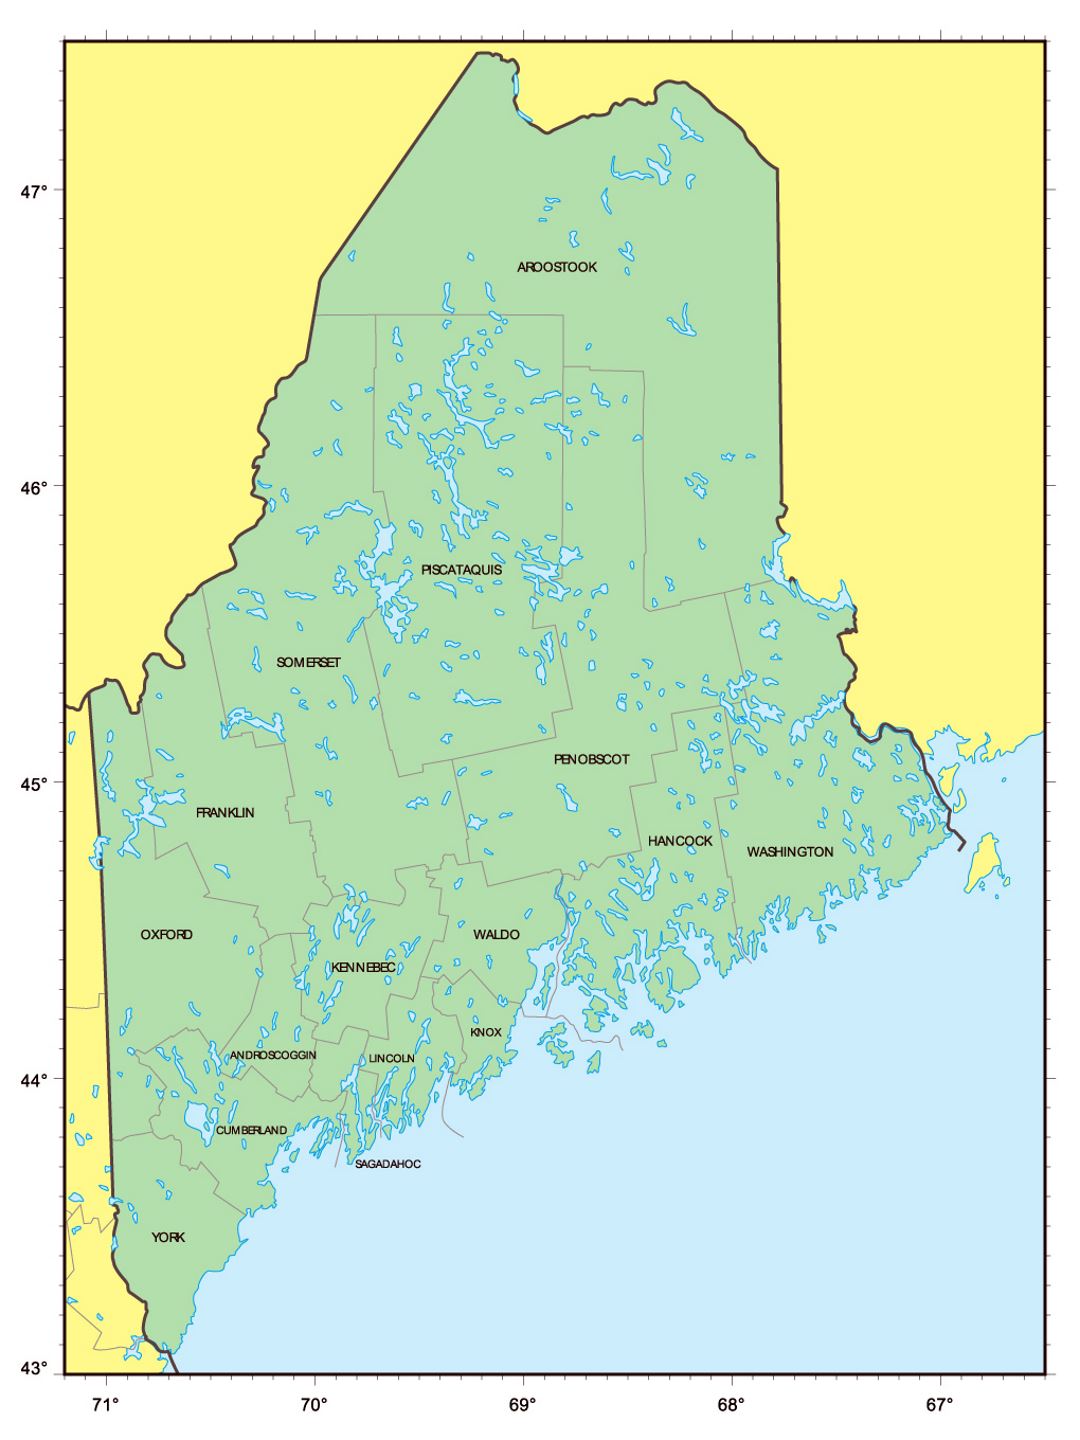 Detailed administrative map of Maine state